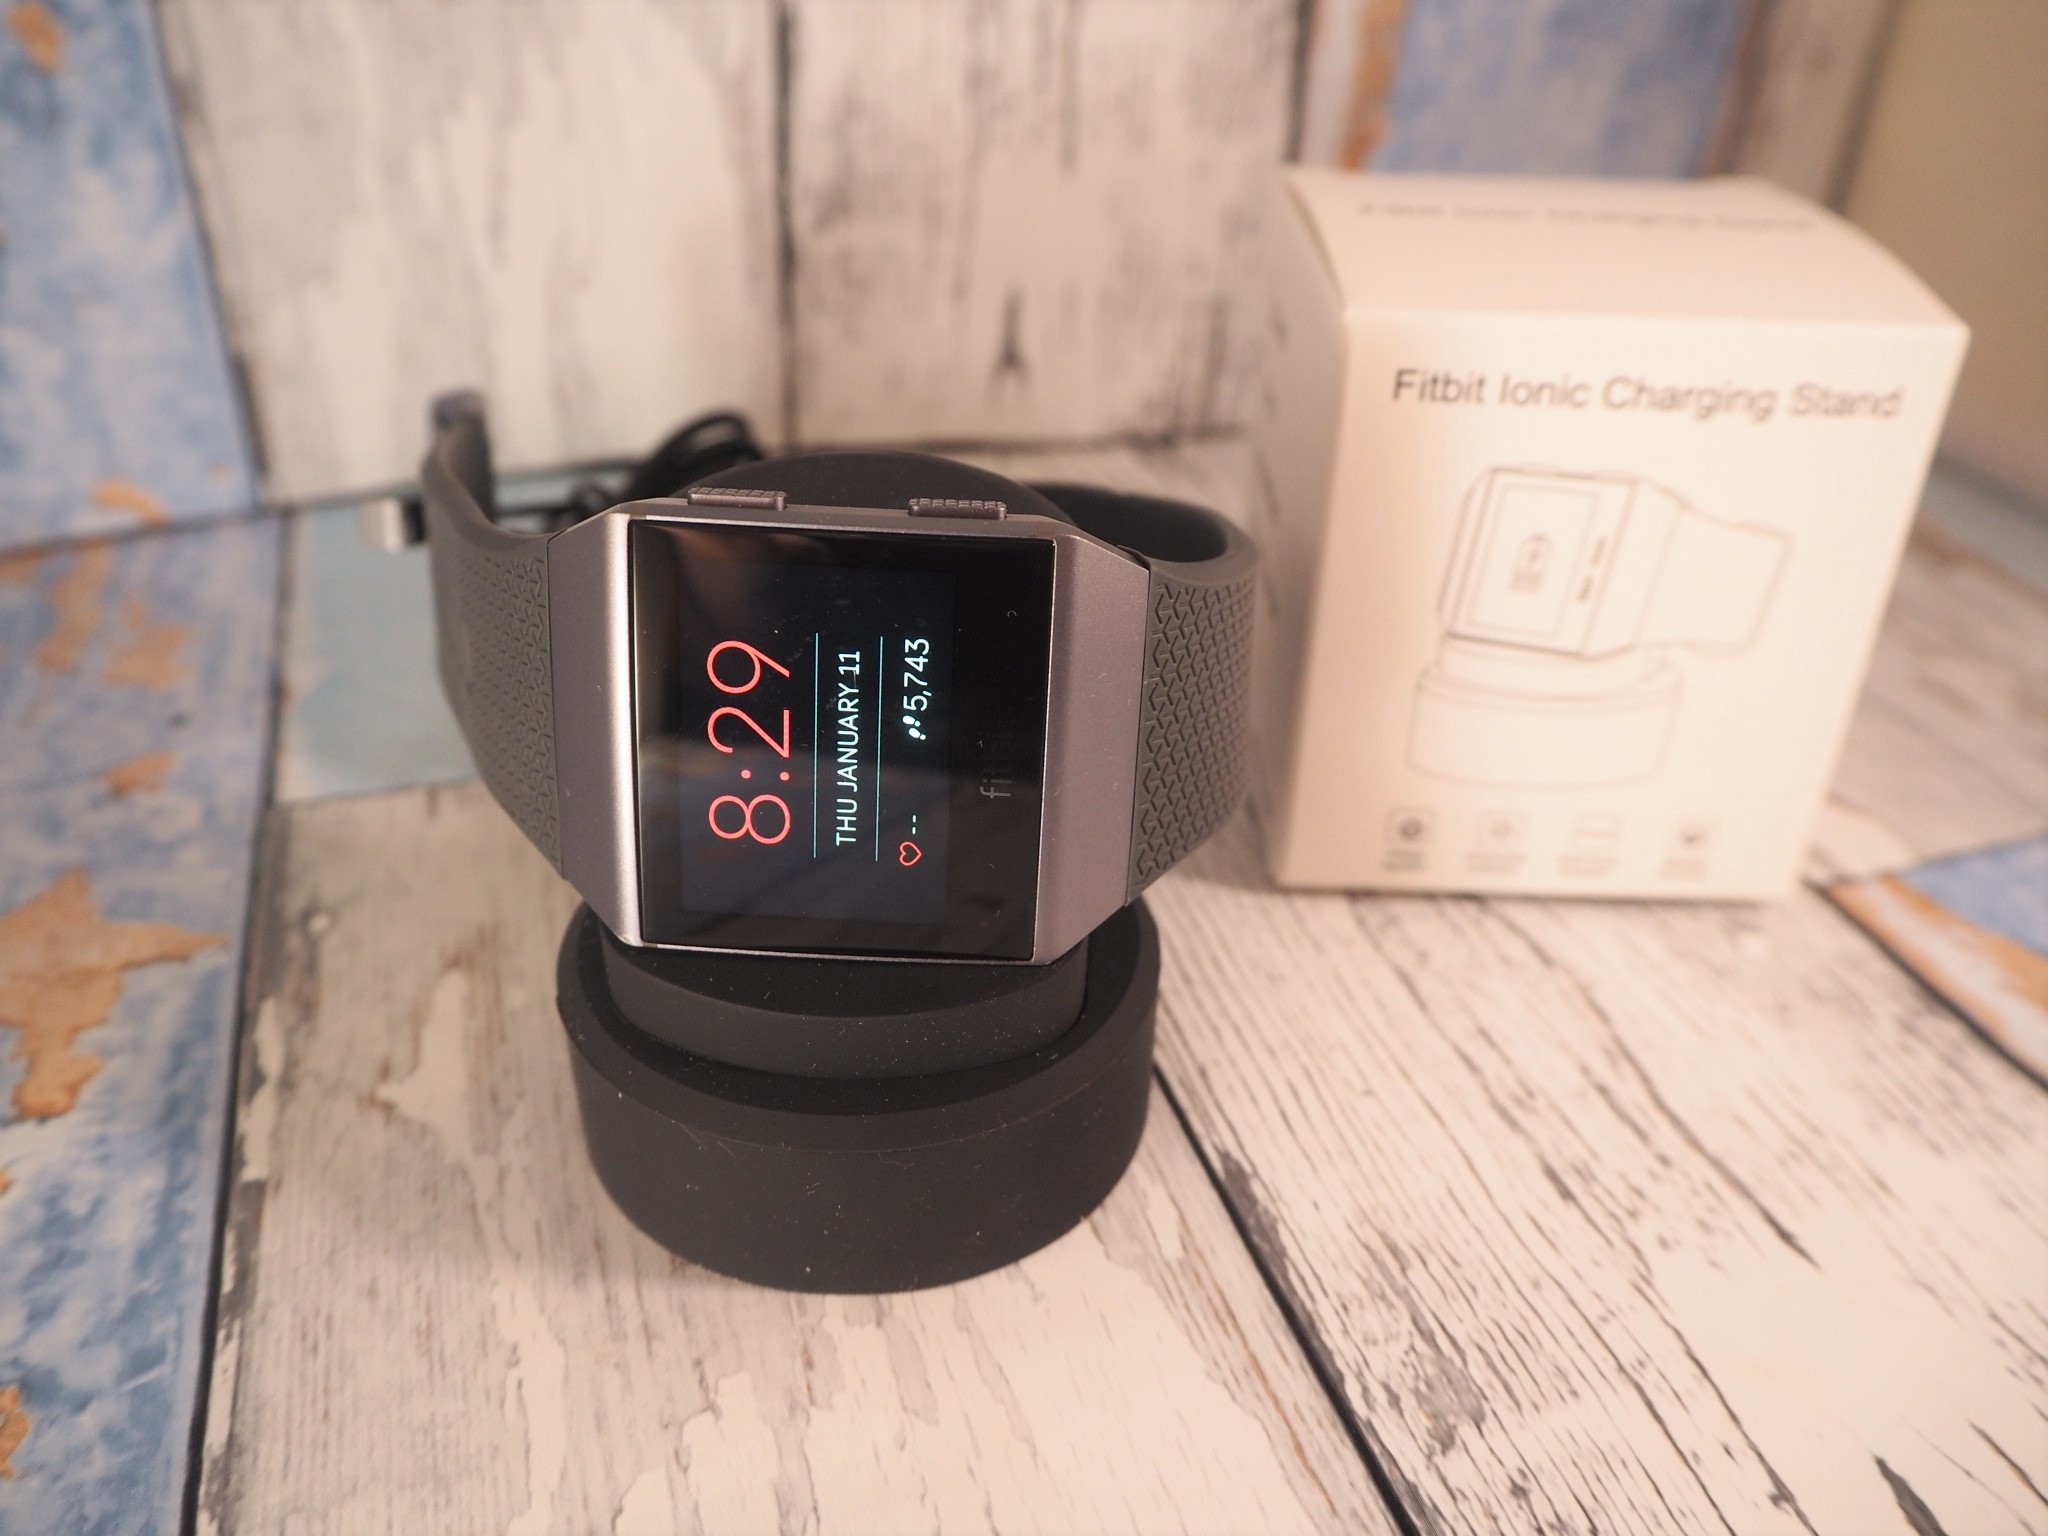 Fitbit Ionic Charger Stand